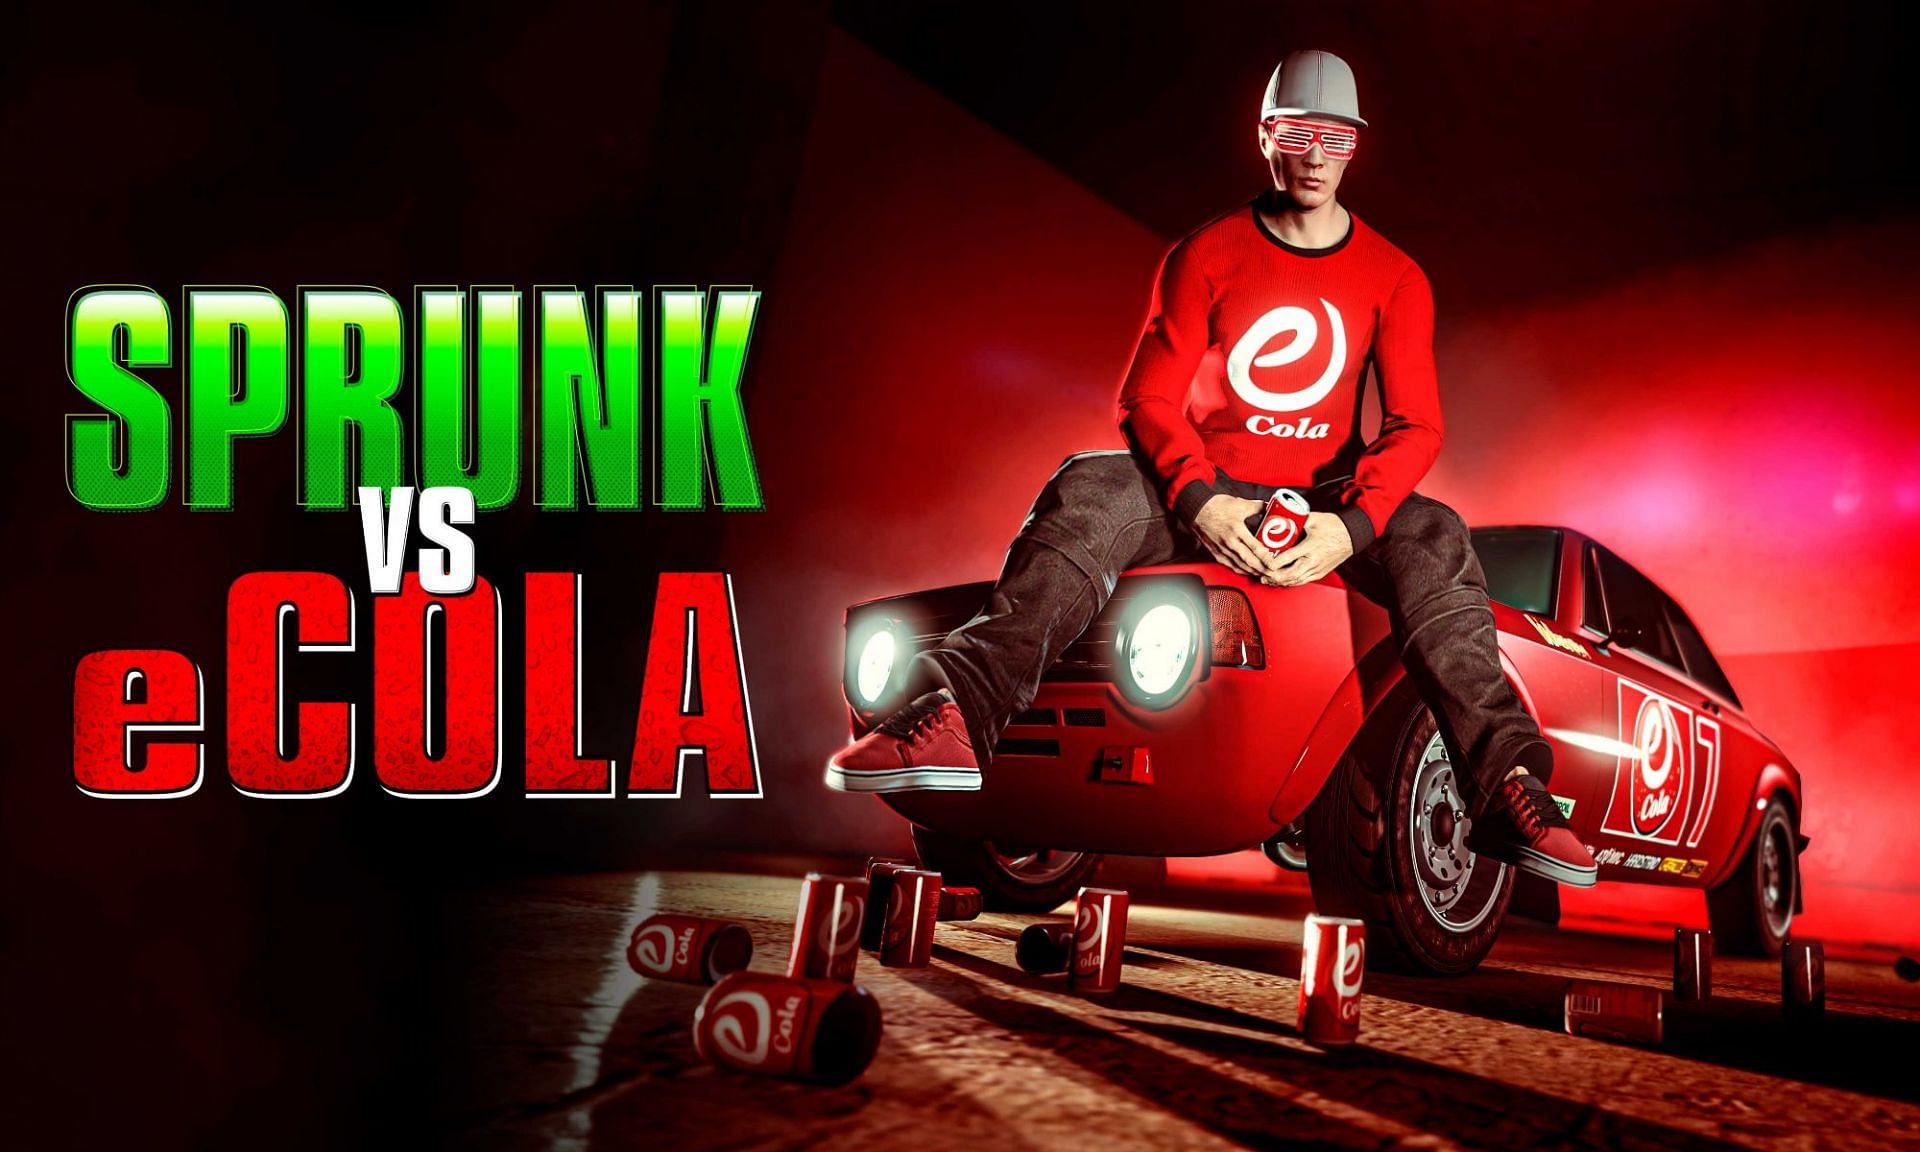 Sprunk versus eCola will be decided by September 14th